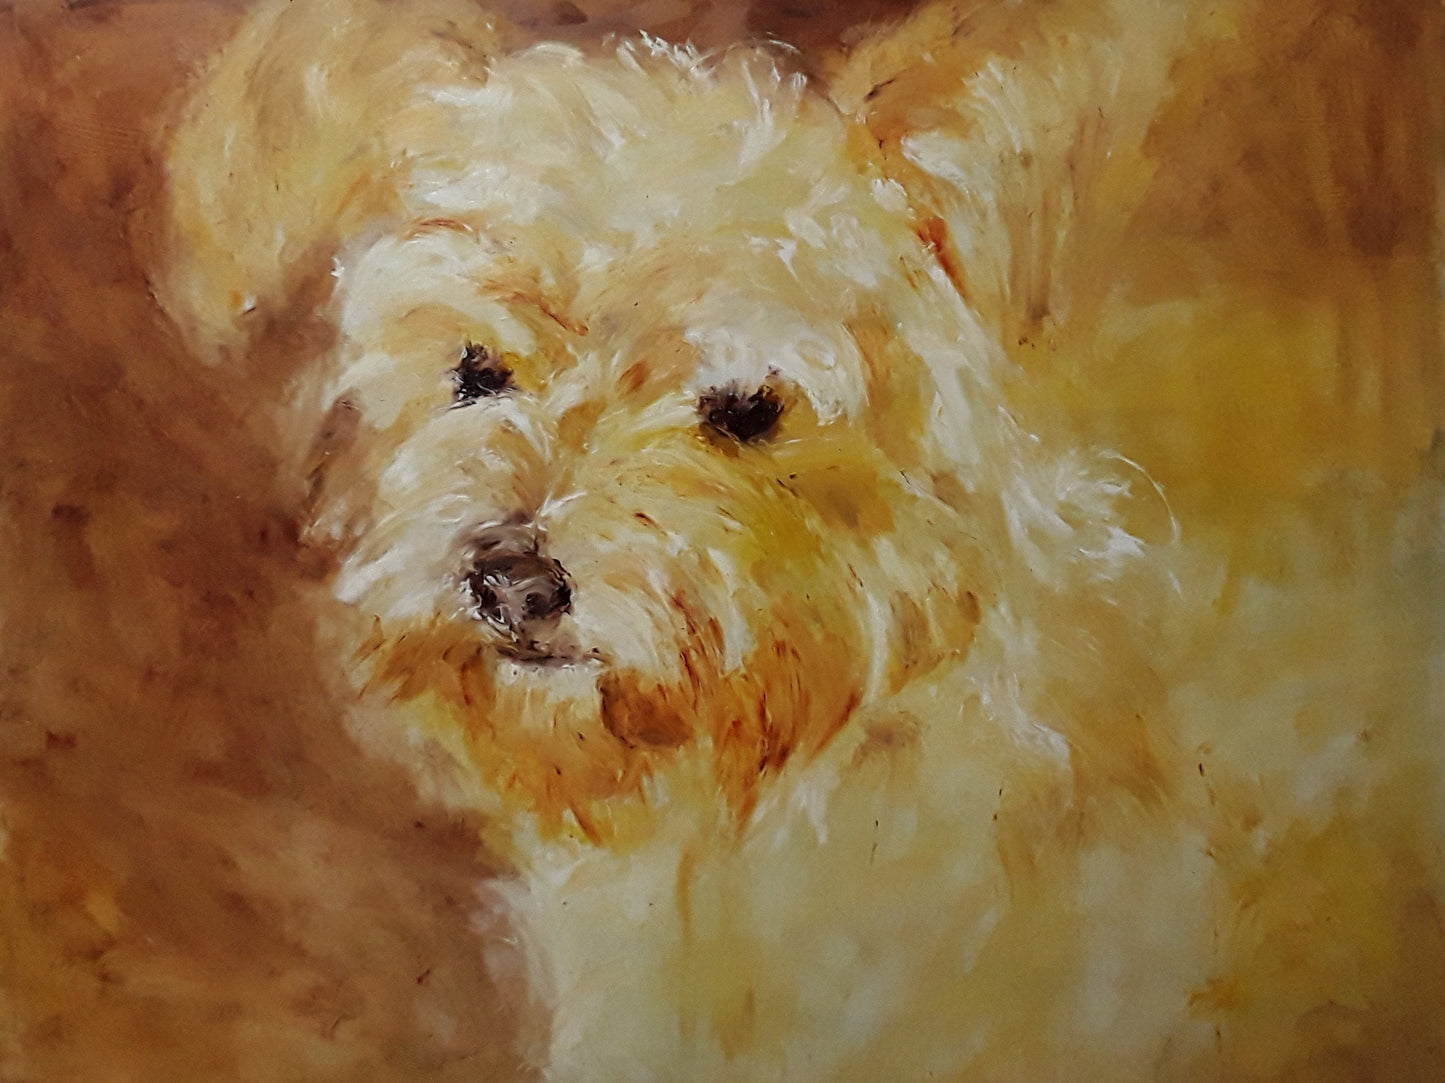 Custom Pet Portrait Painting, Hand Painted, Painting From Photo, Oil Painting on Canvas